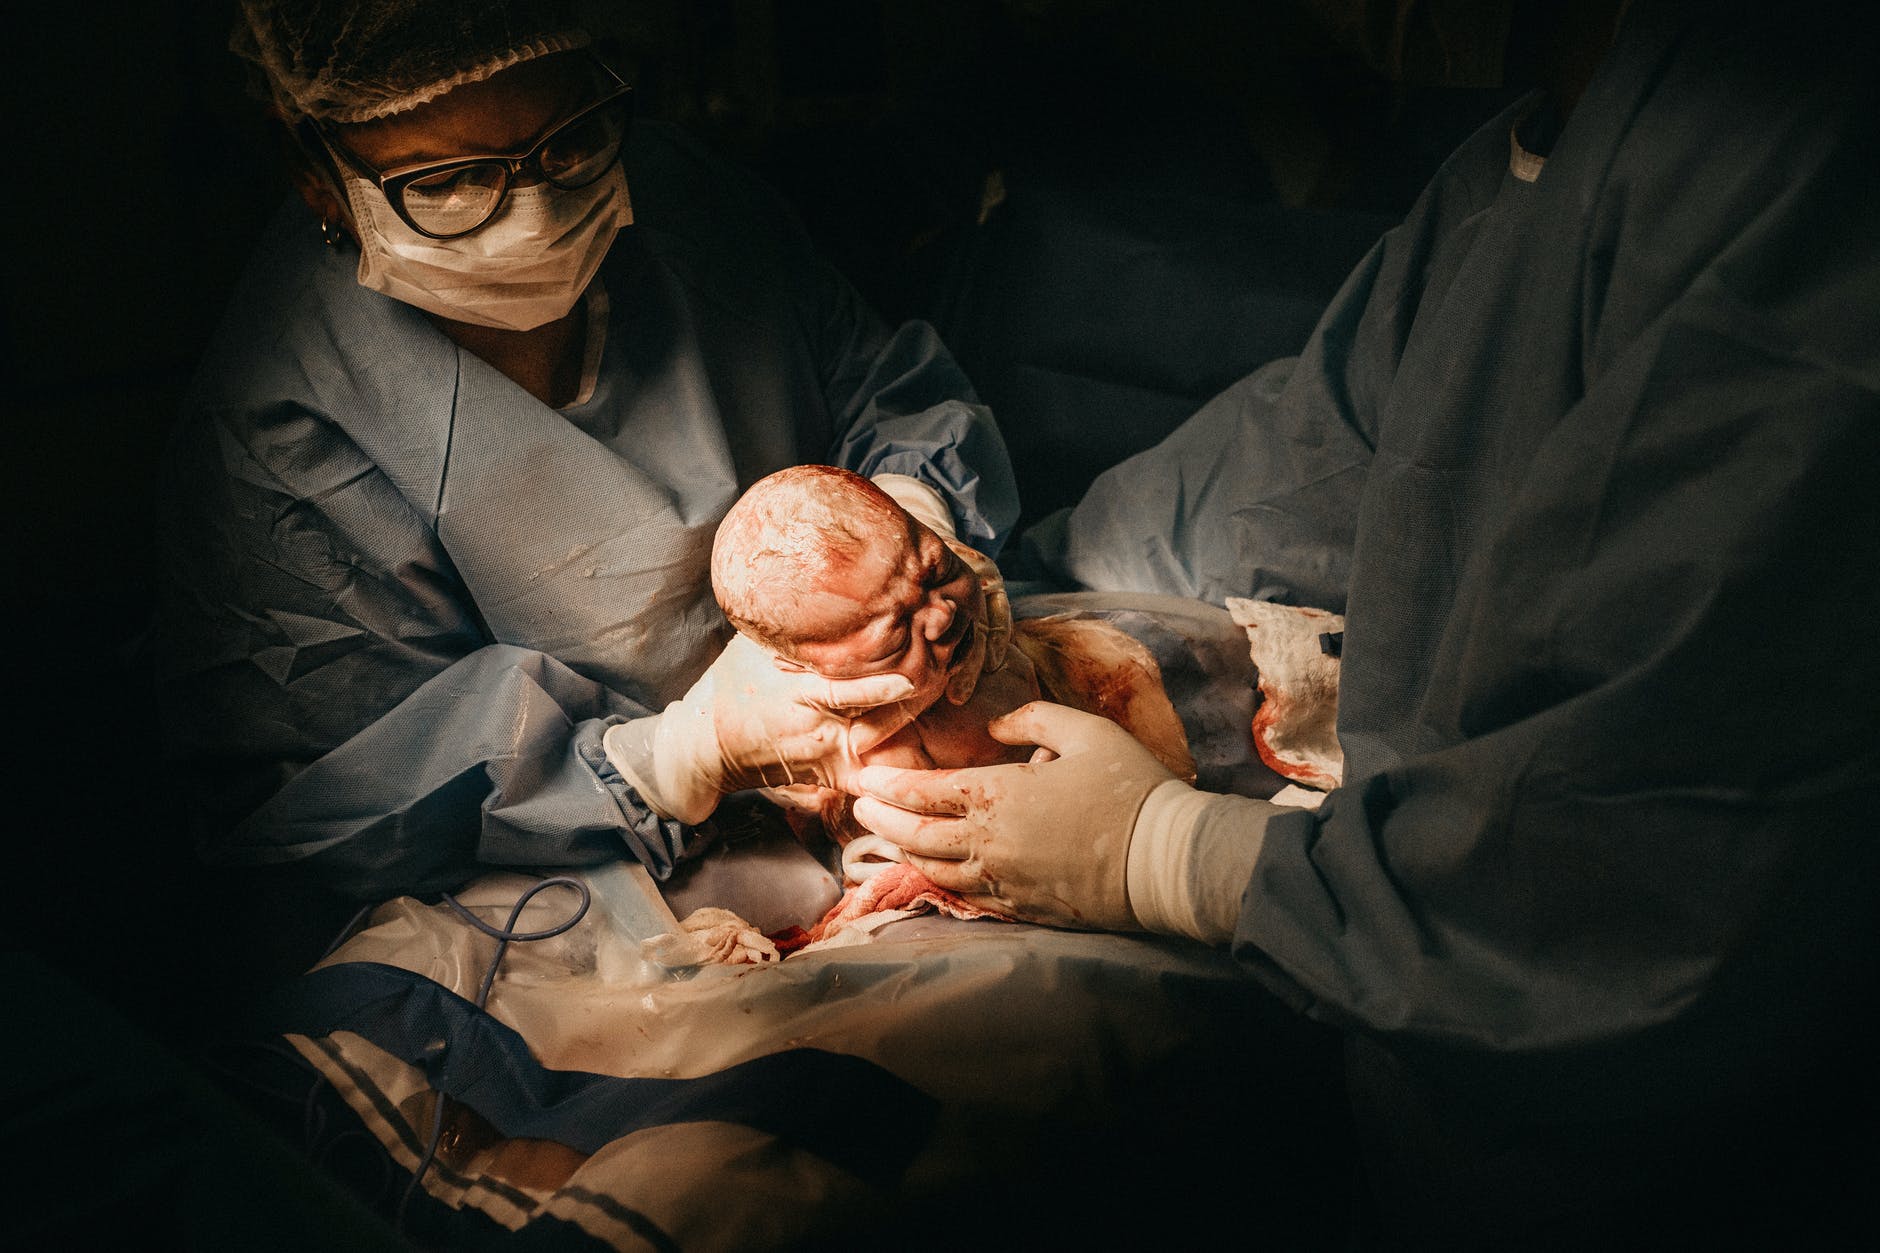 woman giving birth to baby via c section